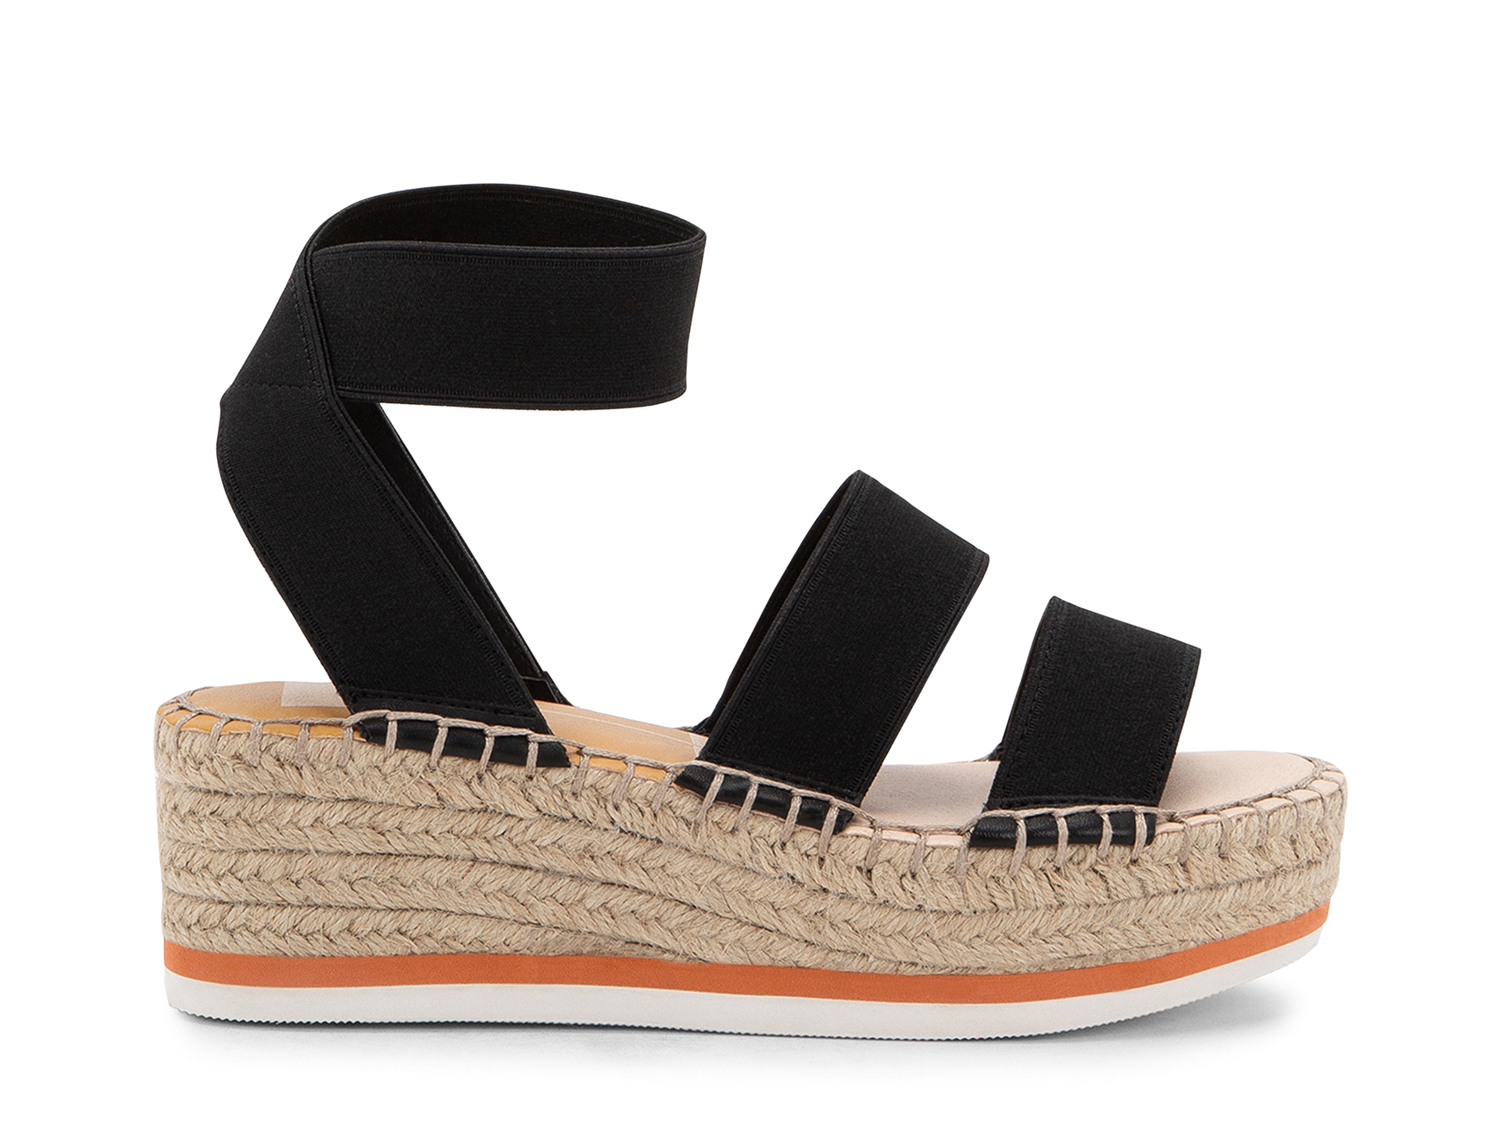 New 9.5 Details about   Dolce Vita Urban Wedge Sandal